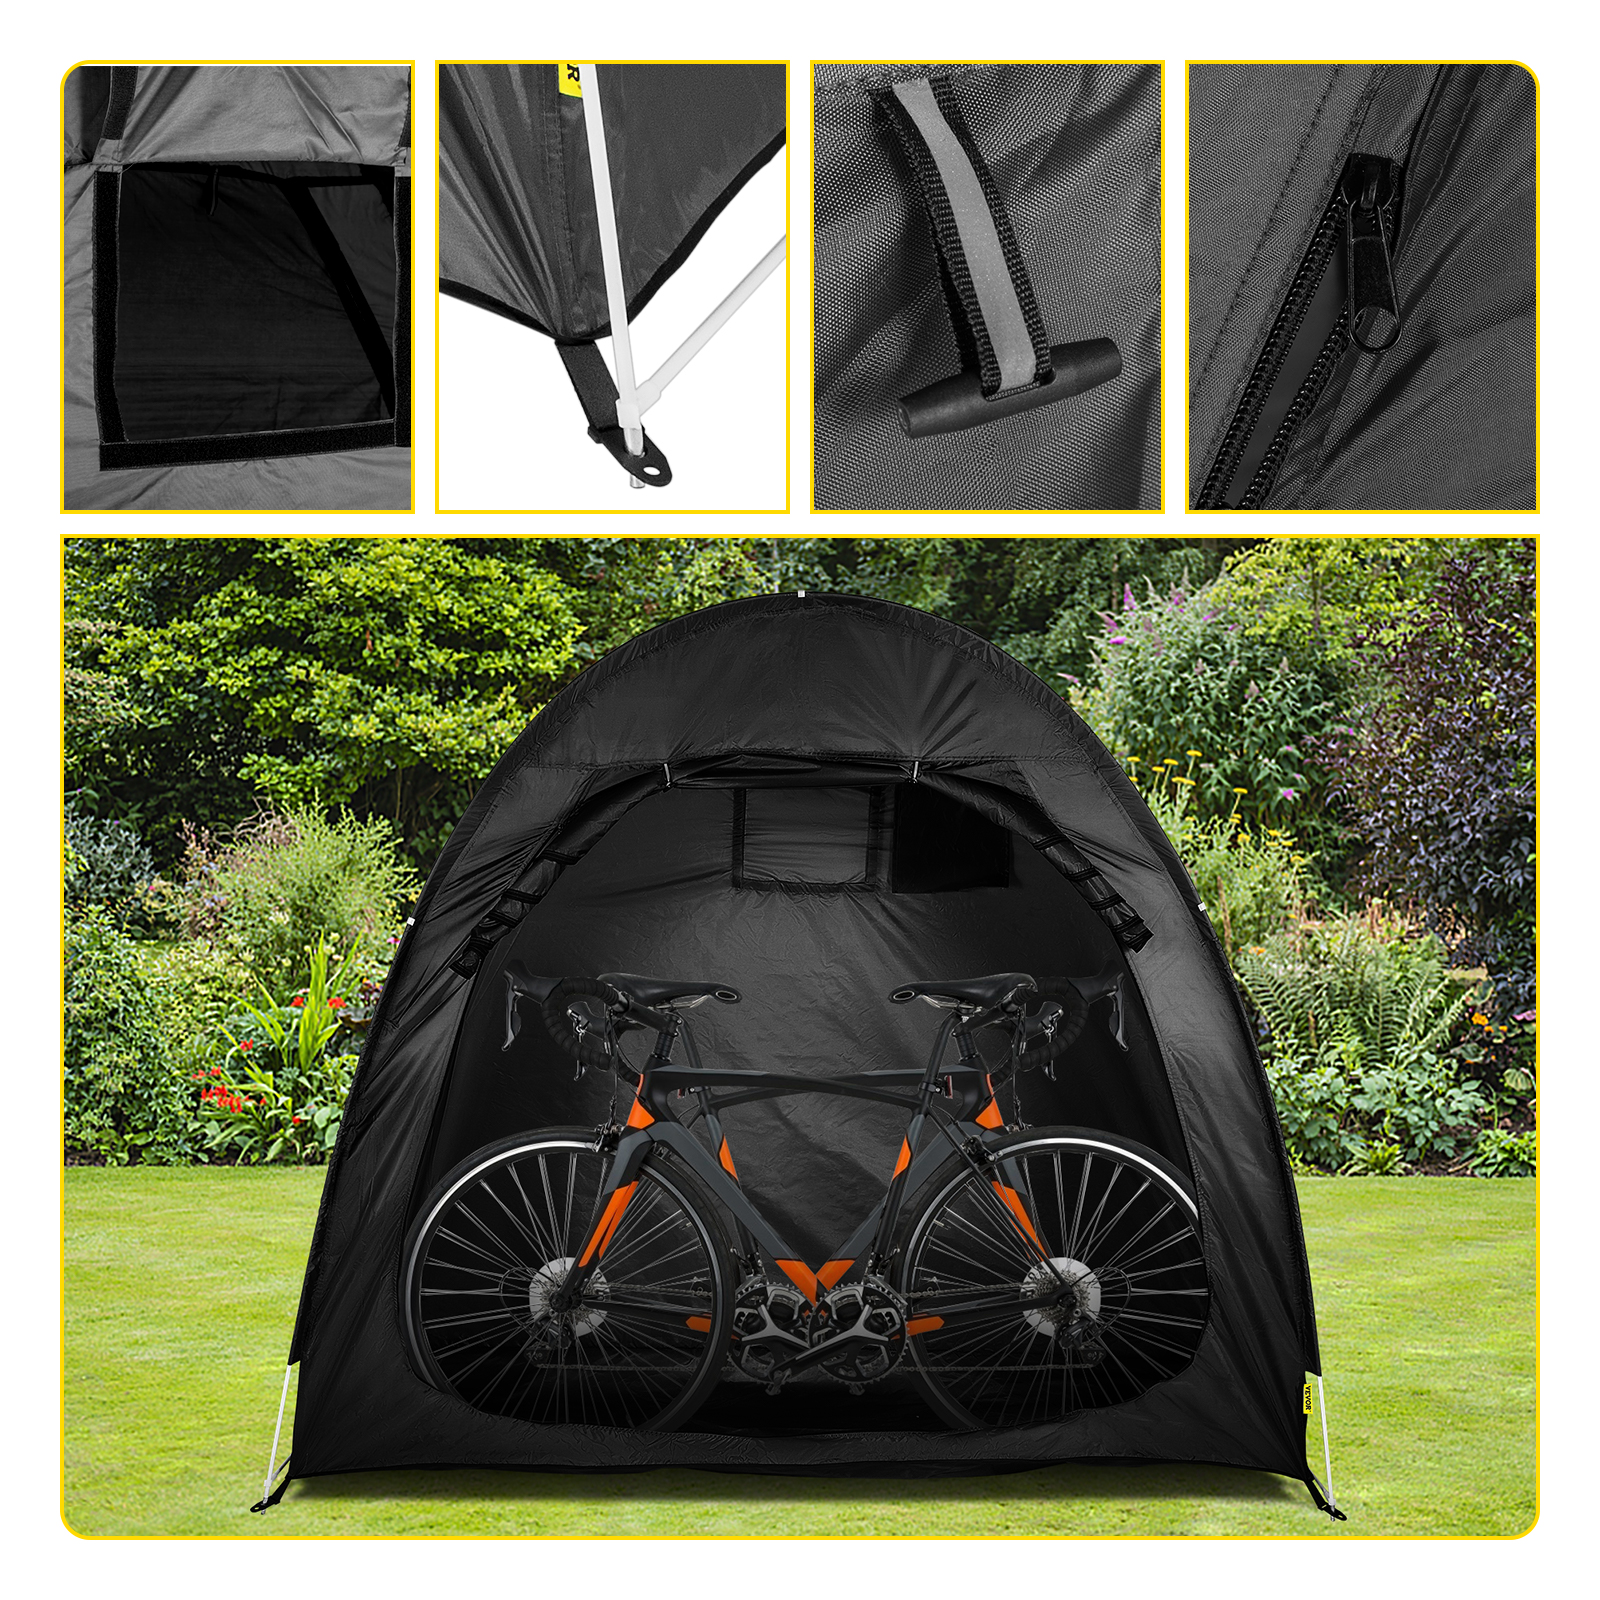 Bicycle Tent Bike Shed for Garden Outdoor Storage Dustproof and Waterproof Canopy Cover for Backyard Camping Hiking Convenient to Carry Black 